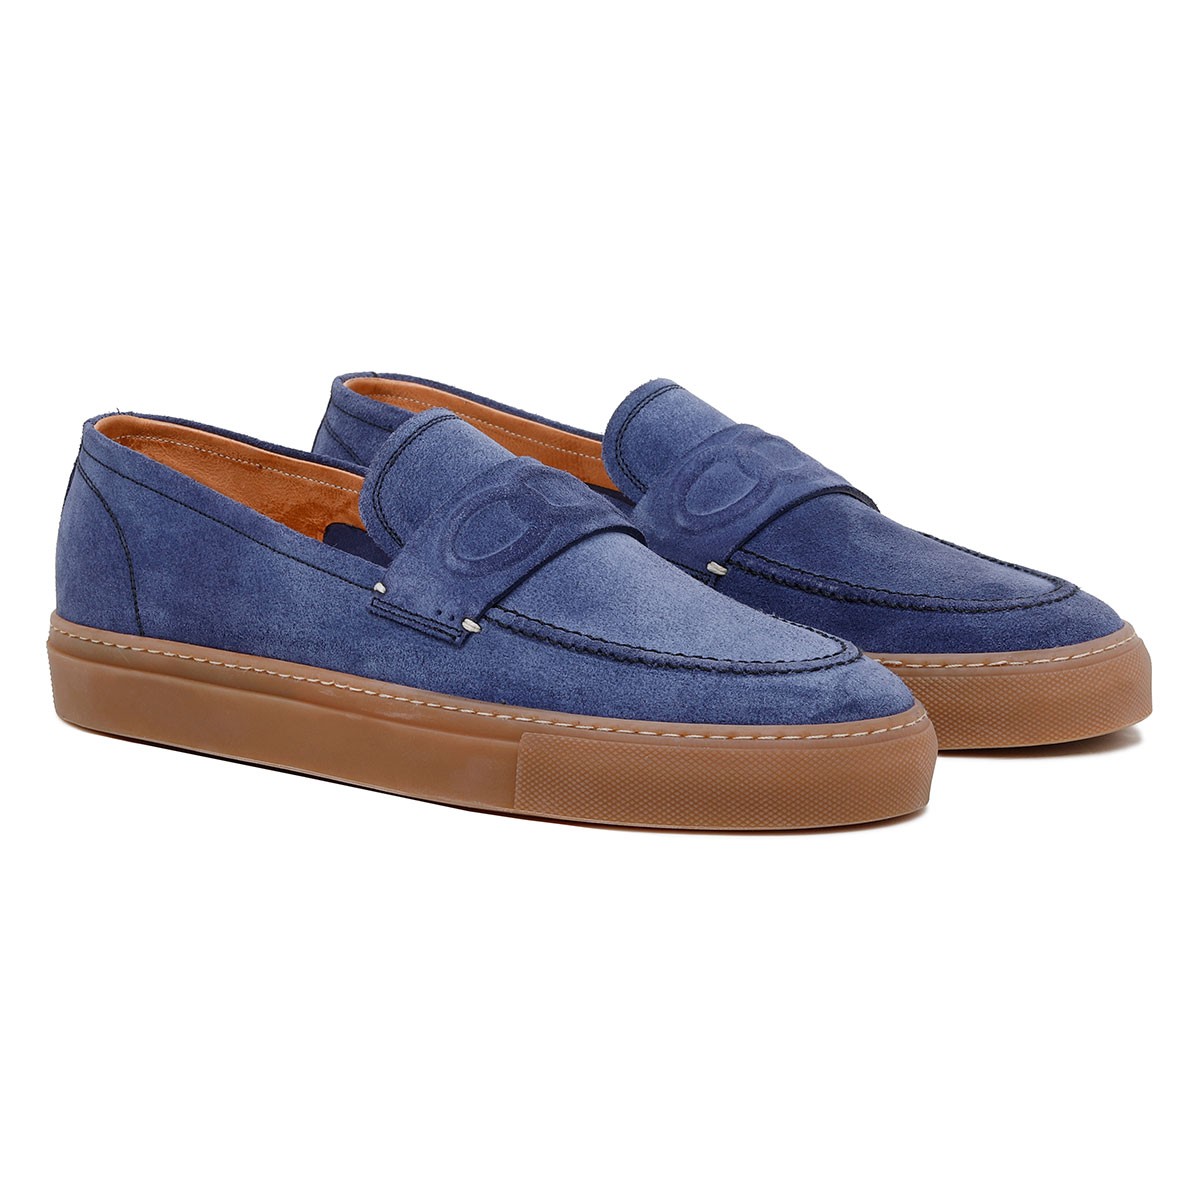 St. Tropez blue suede loafers